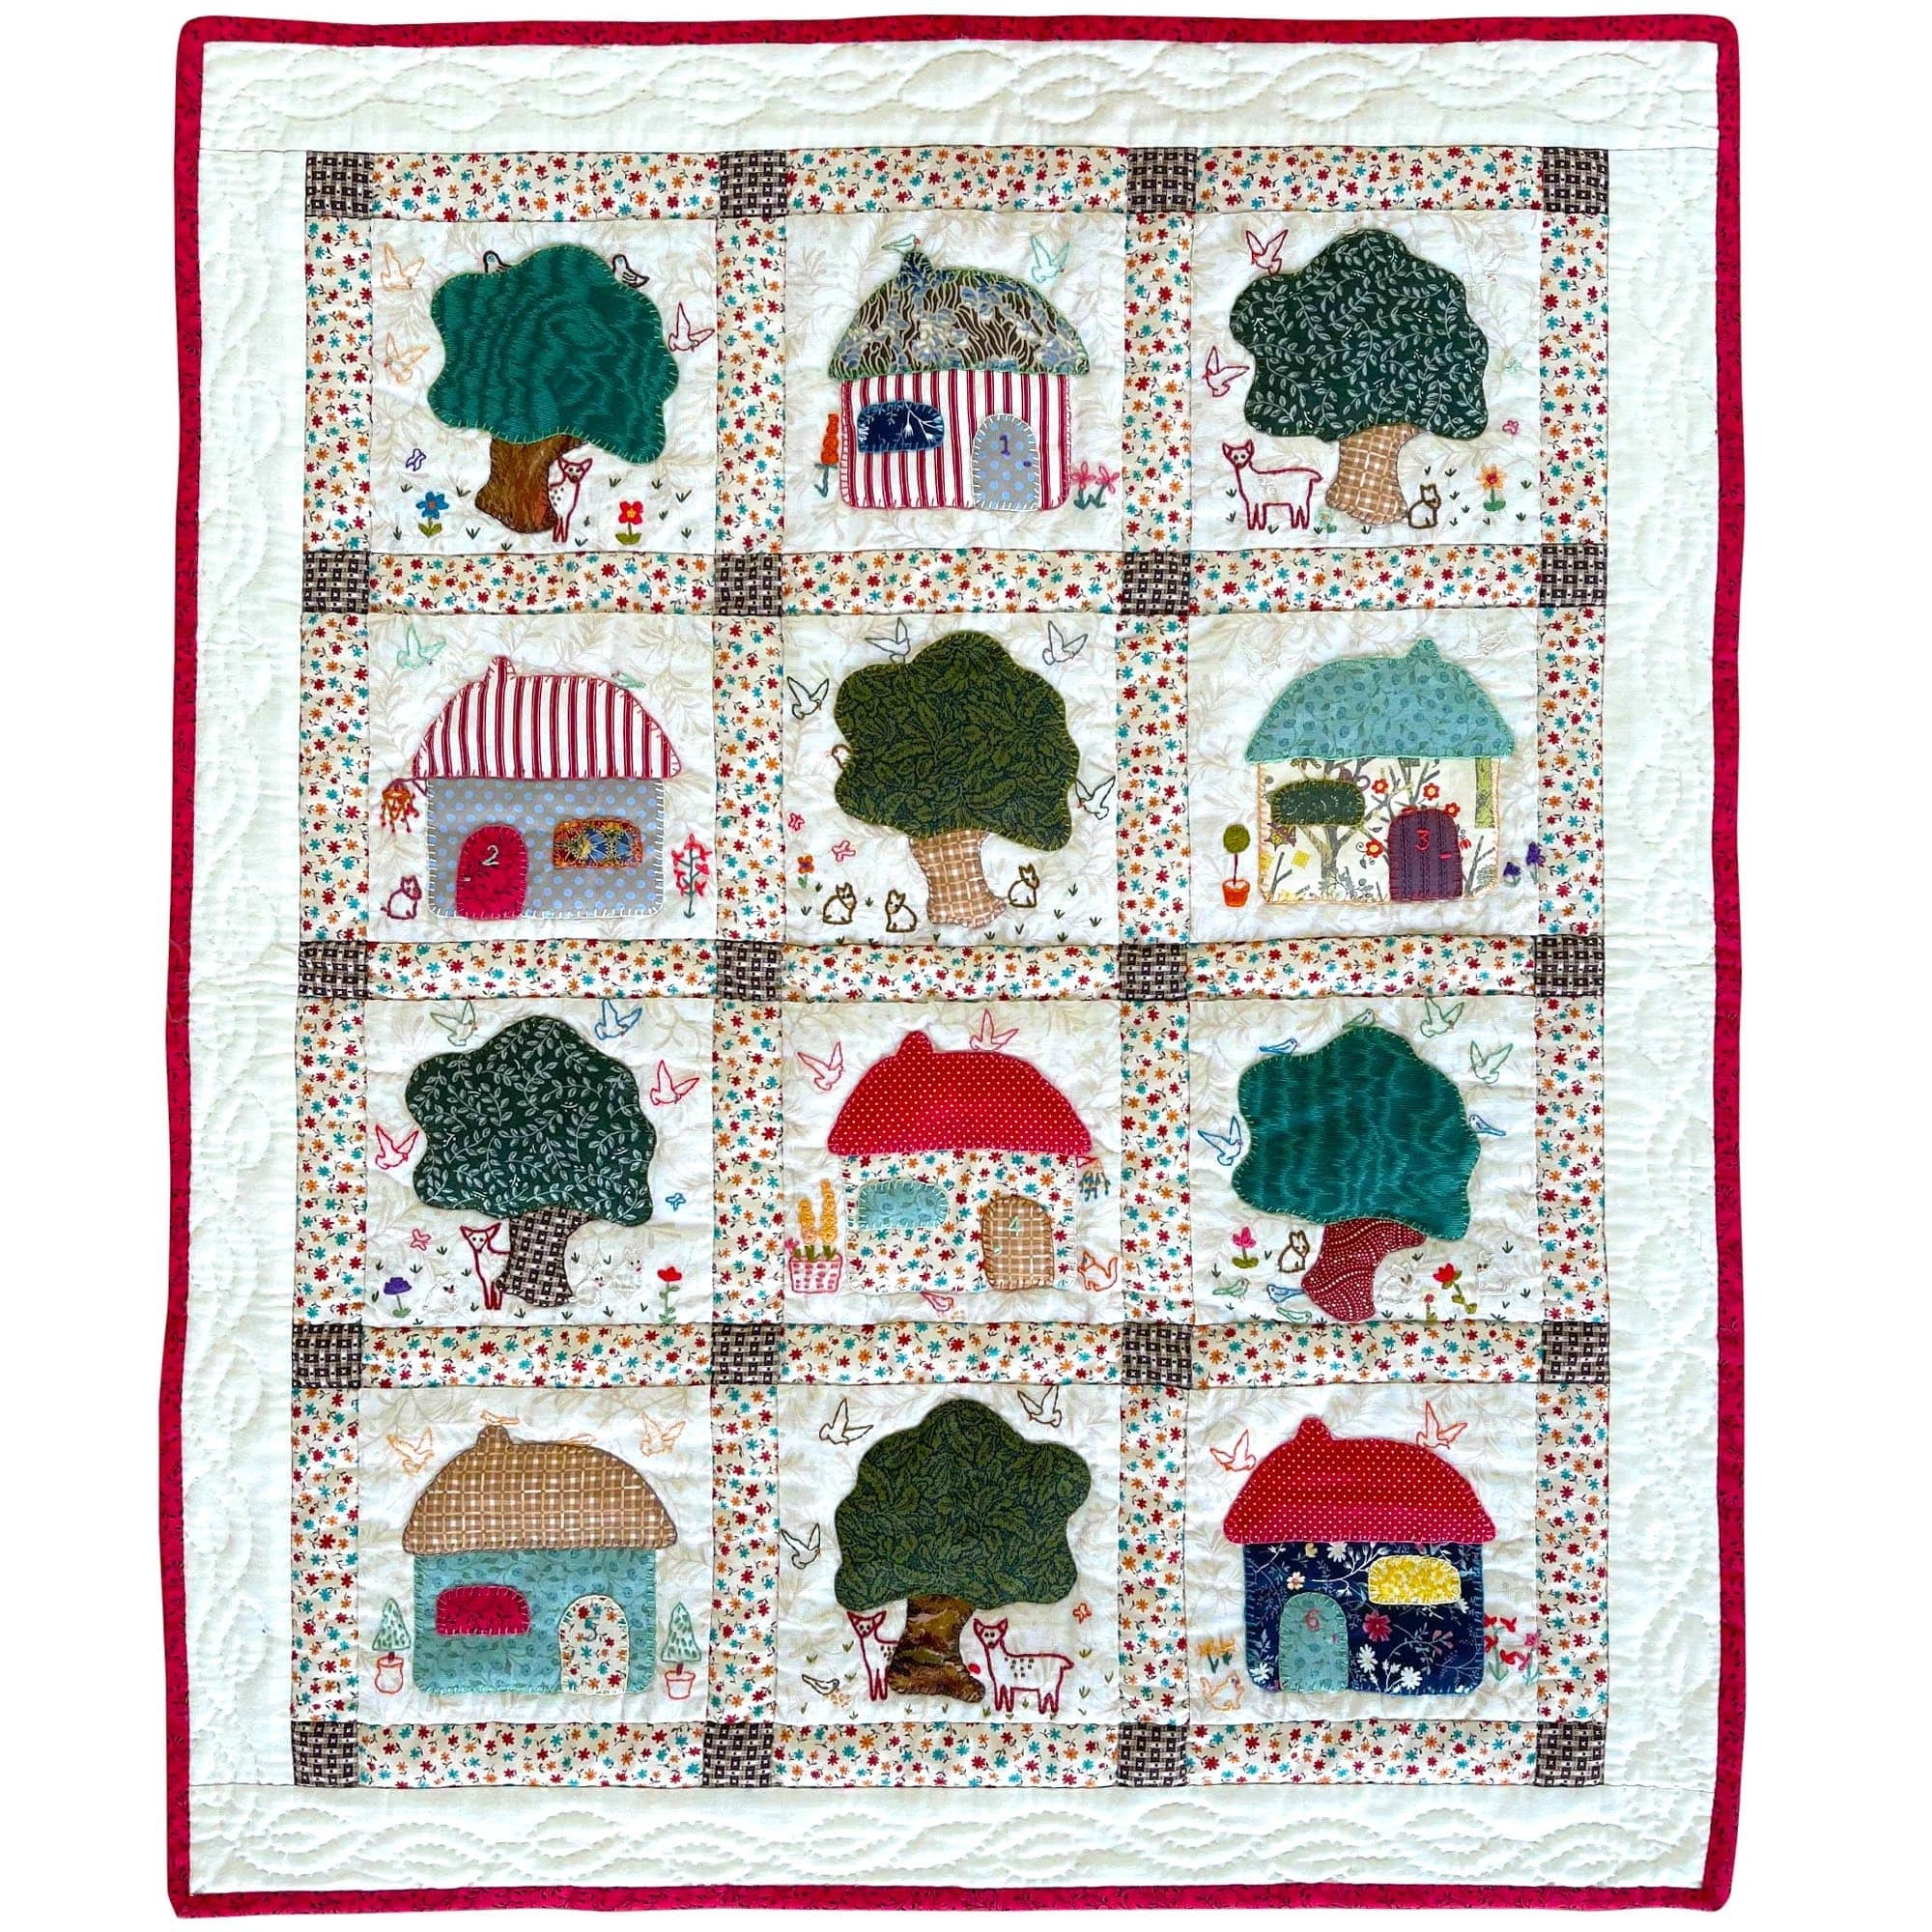 Fine-Cell-Work-Handmade-Childrens-Quilt-The-Village-in-the-Woods-Multicolour-Floral.jpg